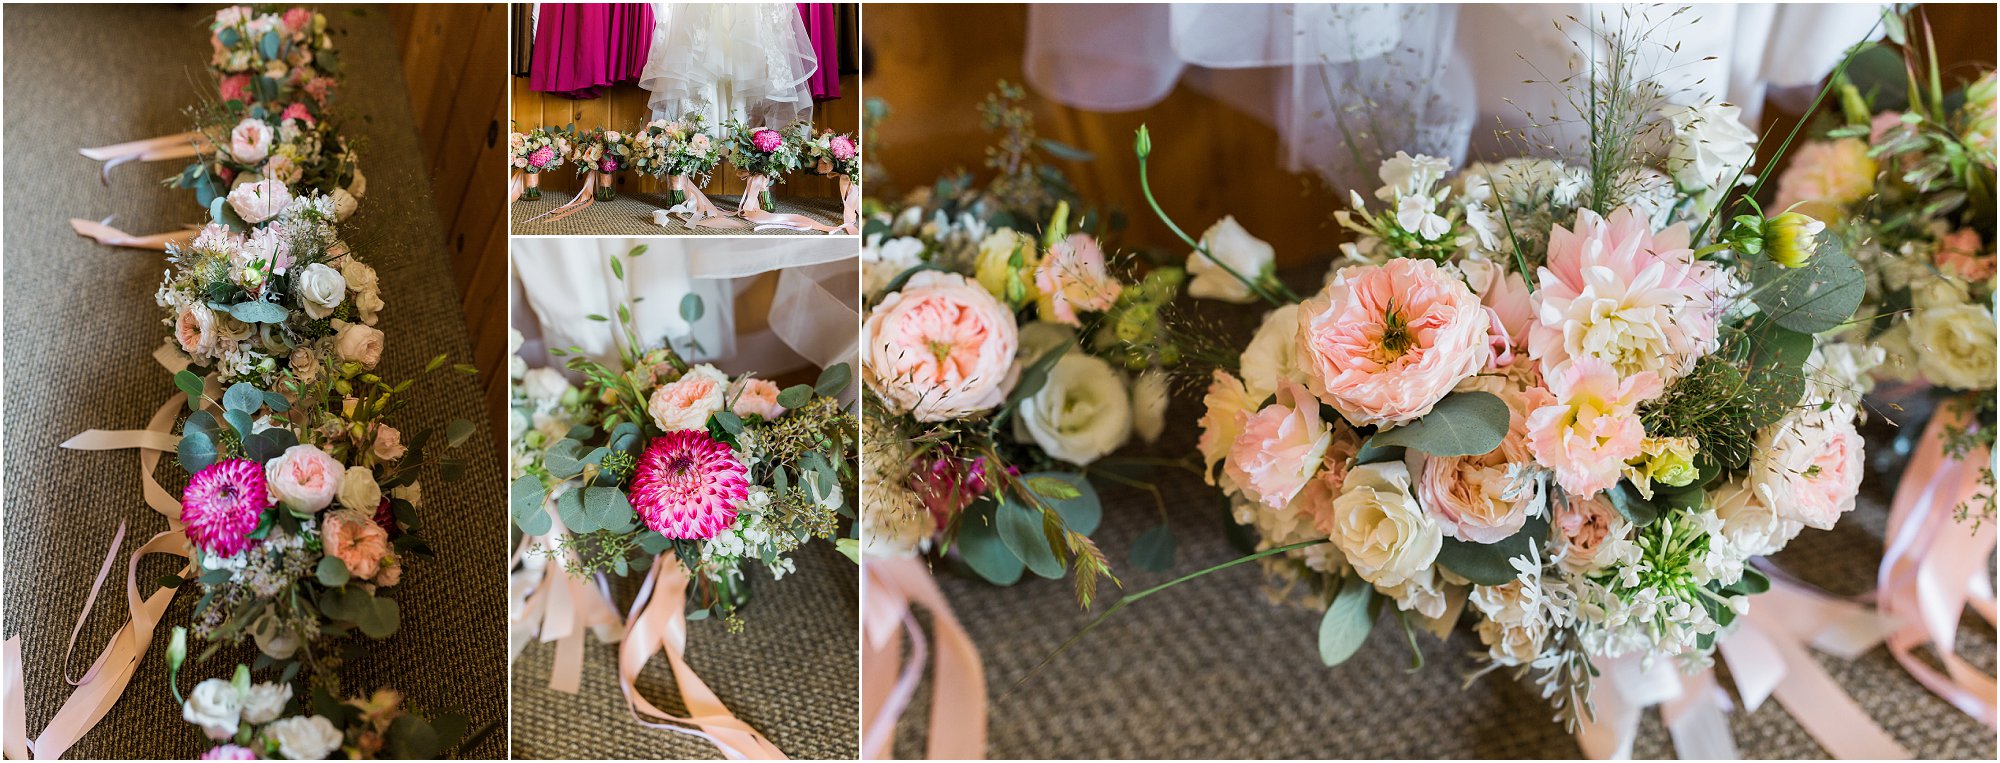 Gorgeous bridal and bridal party bouquets for this Rock Springs Ranch wedding near Bend, OR. | Erica Swantek Photography